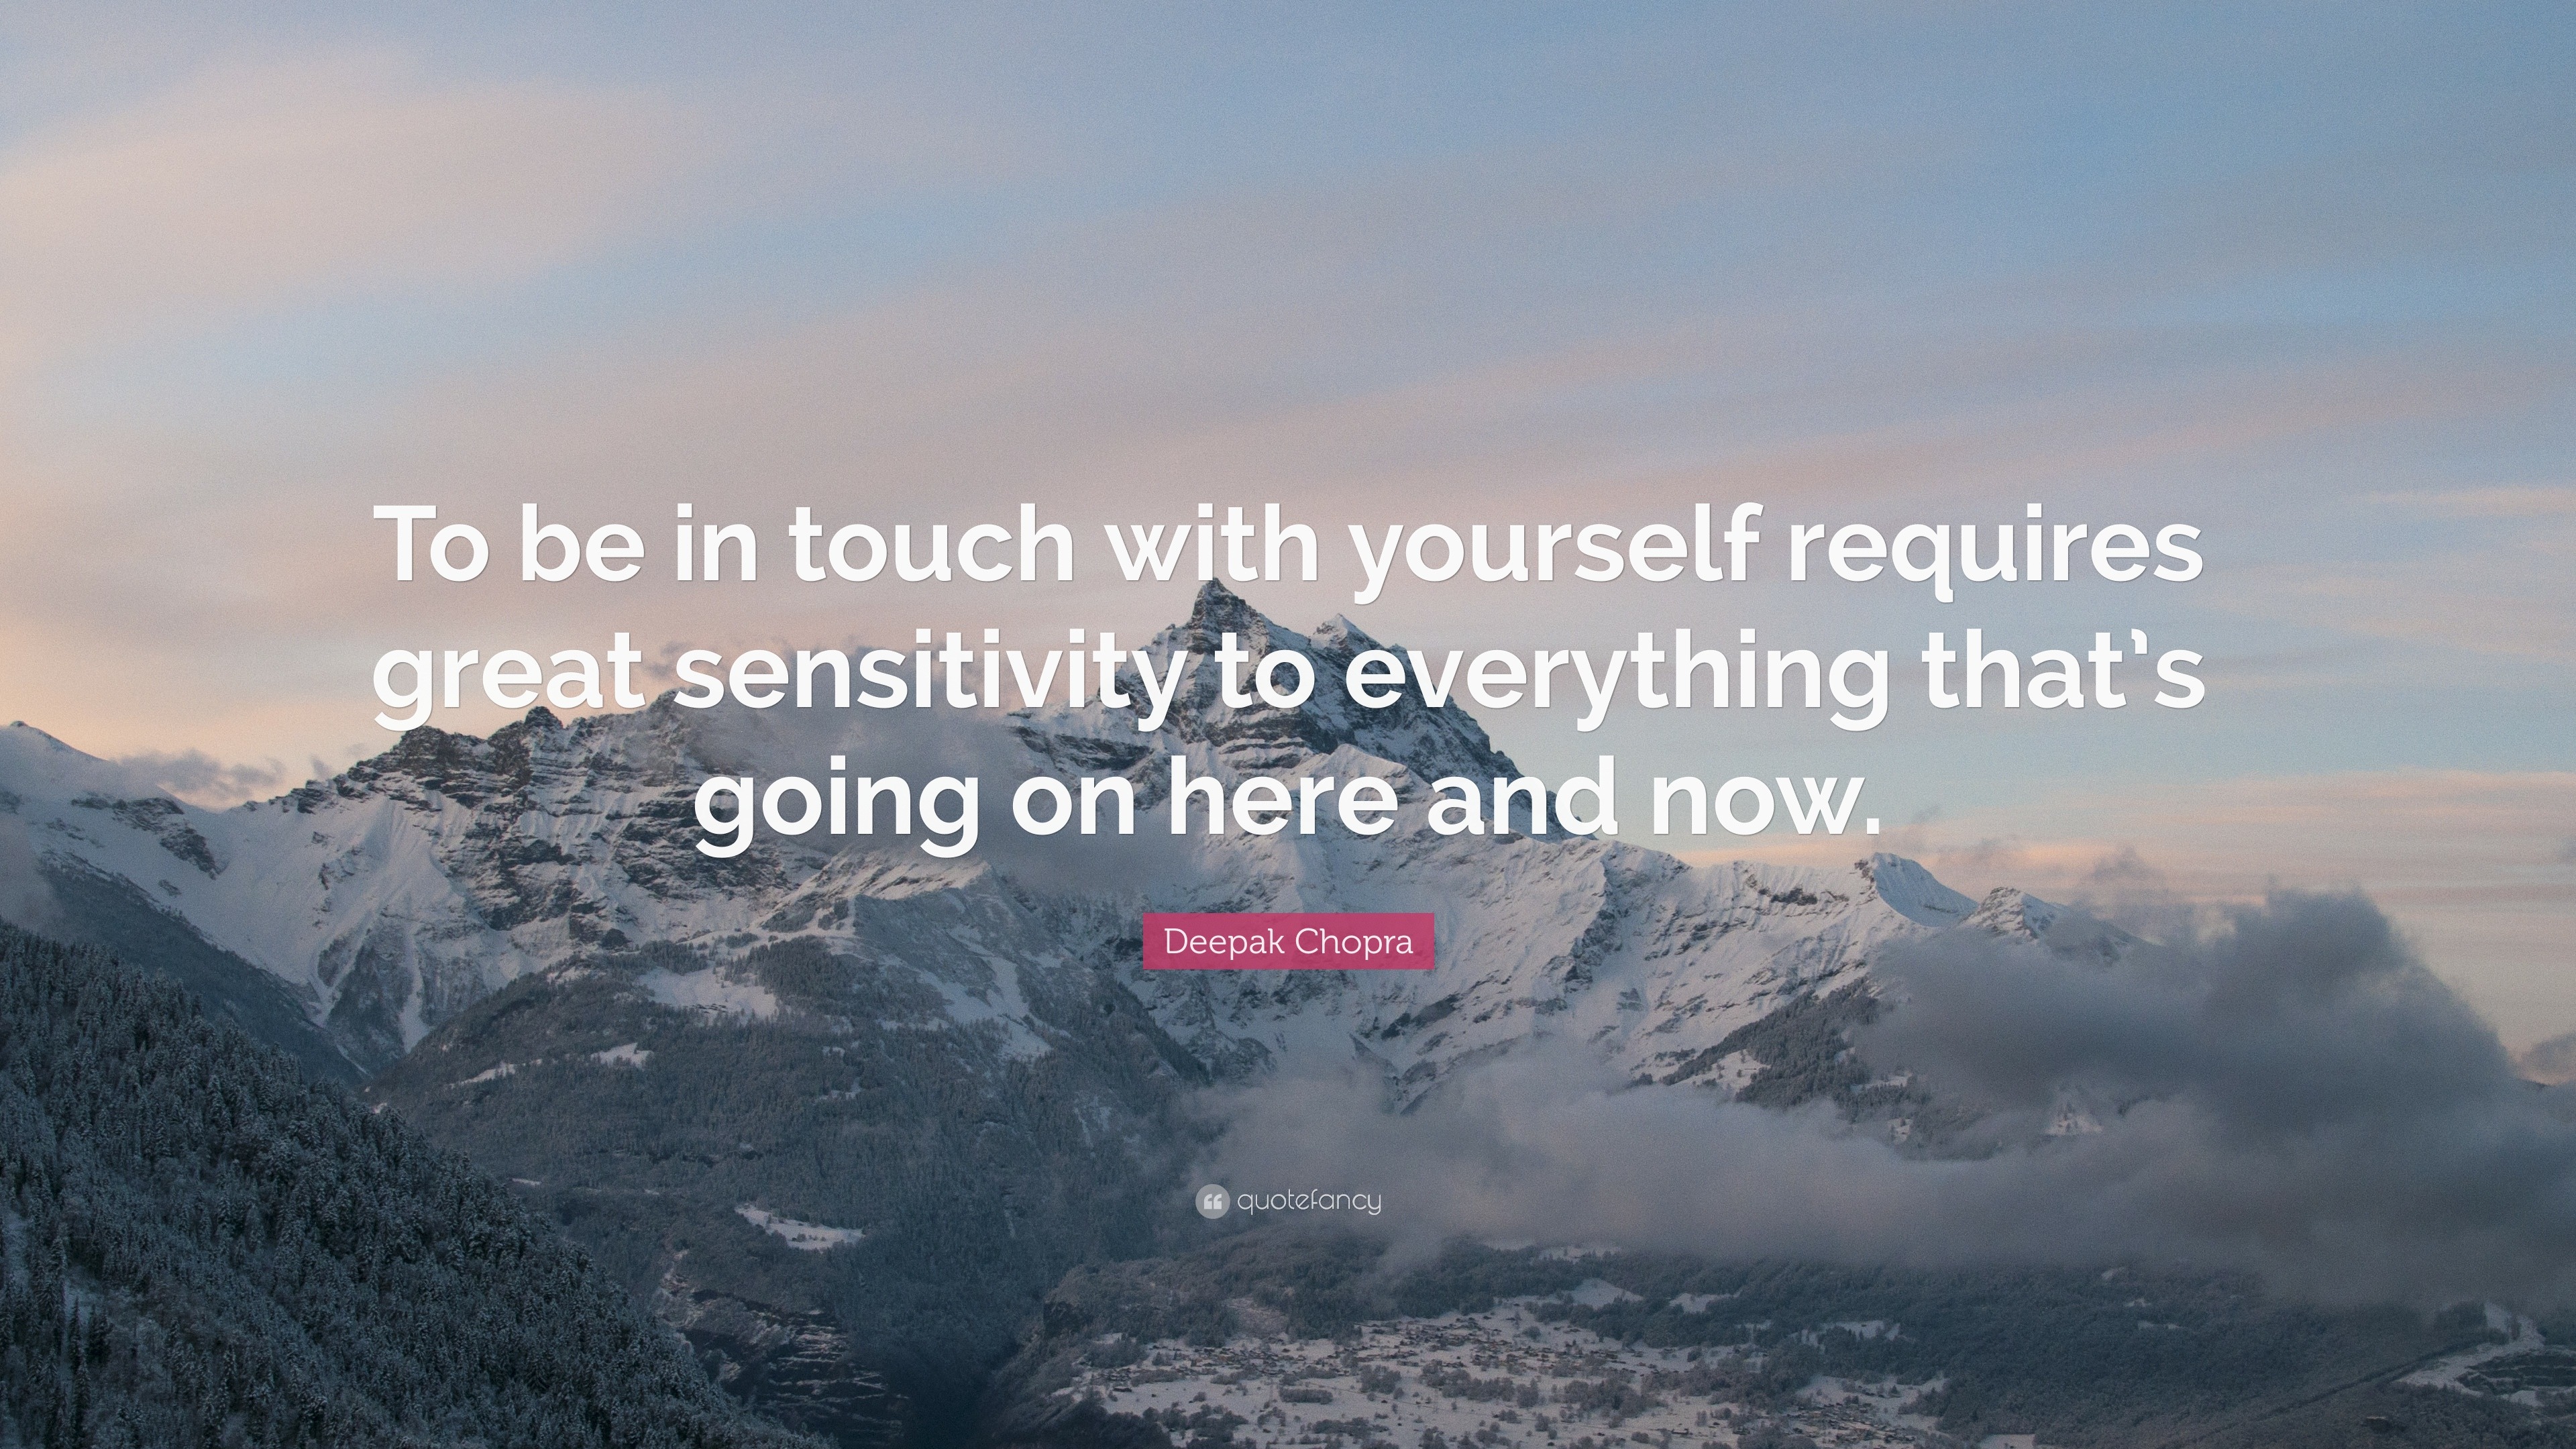 getting in touch with yourself